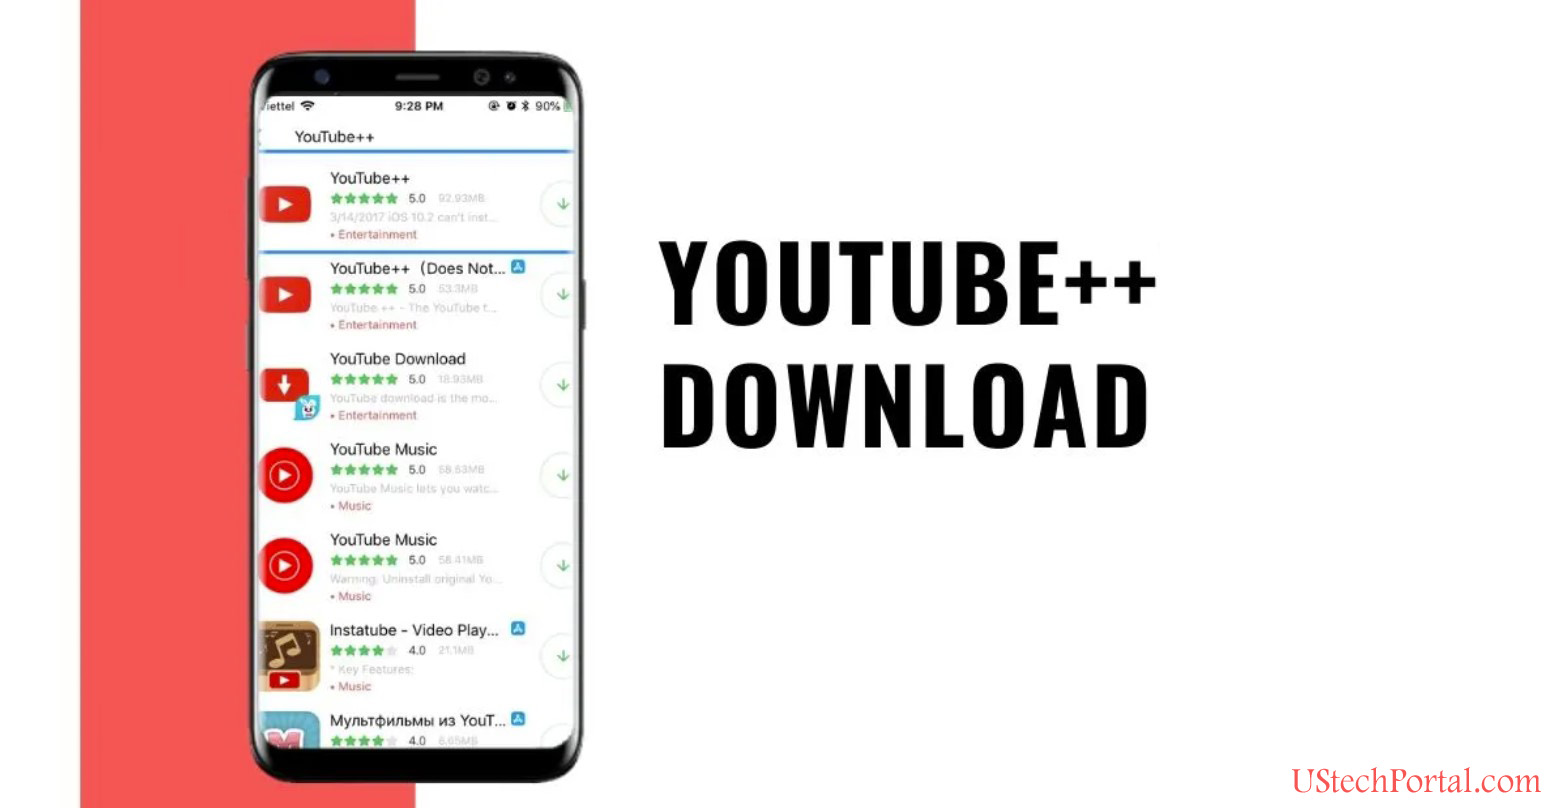 Youtube++ : How to Download Youtube++ on Android, iOS, Windows